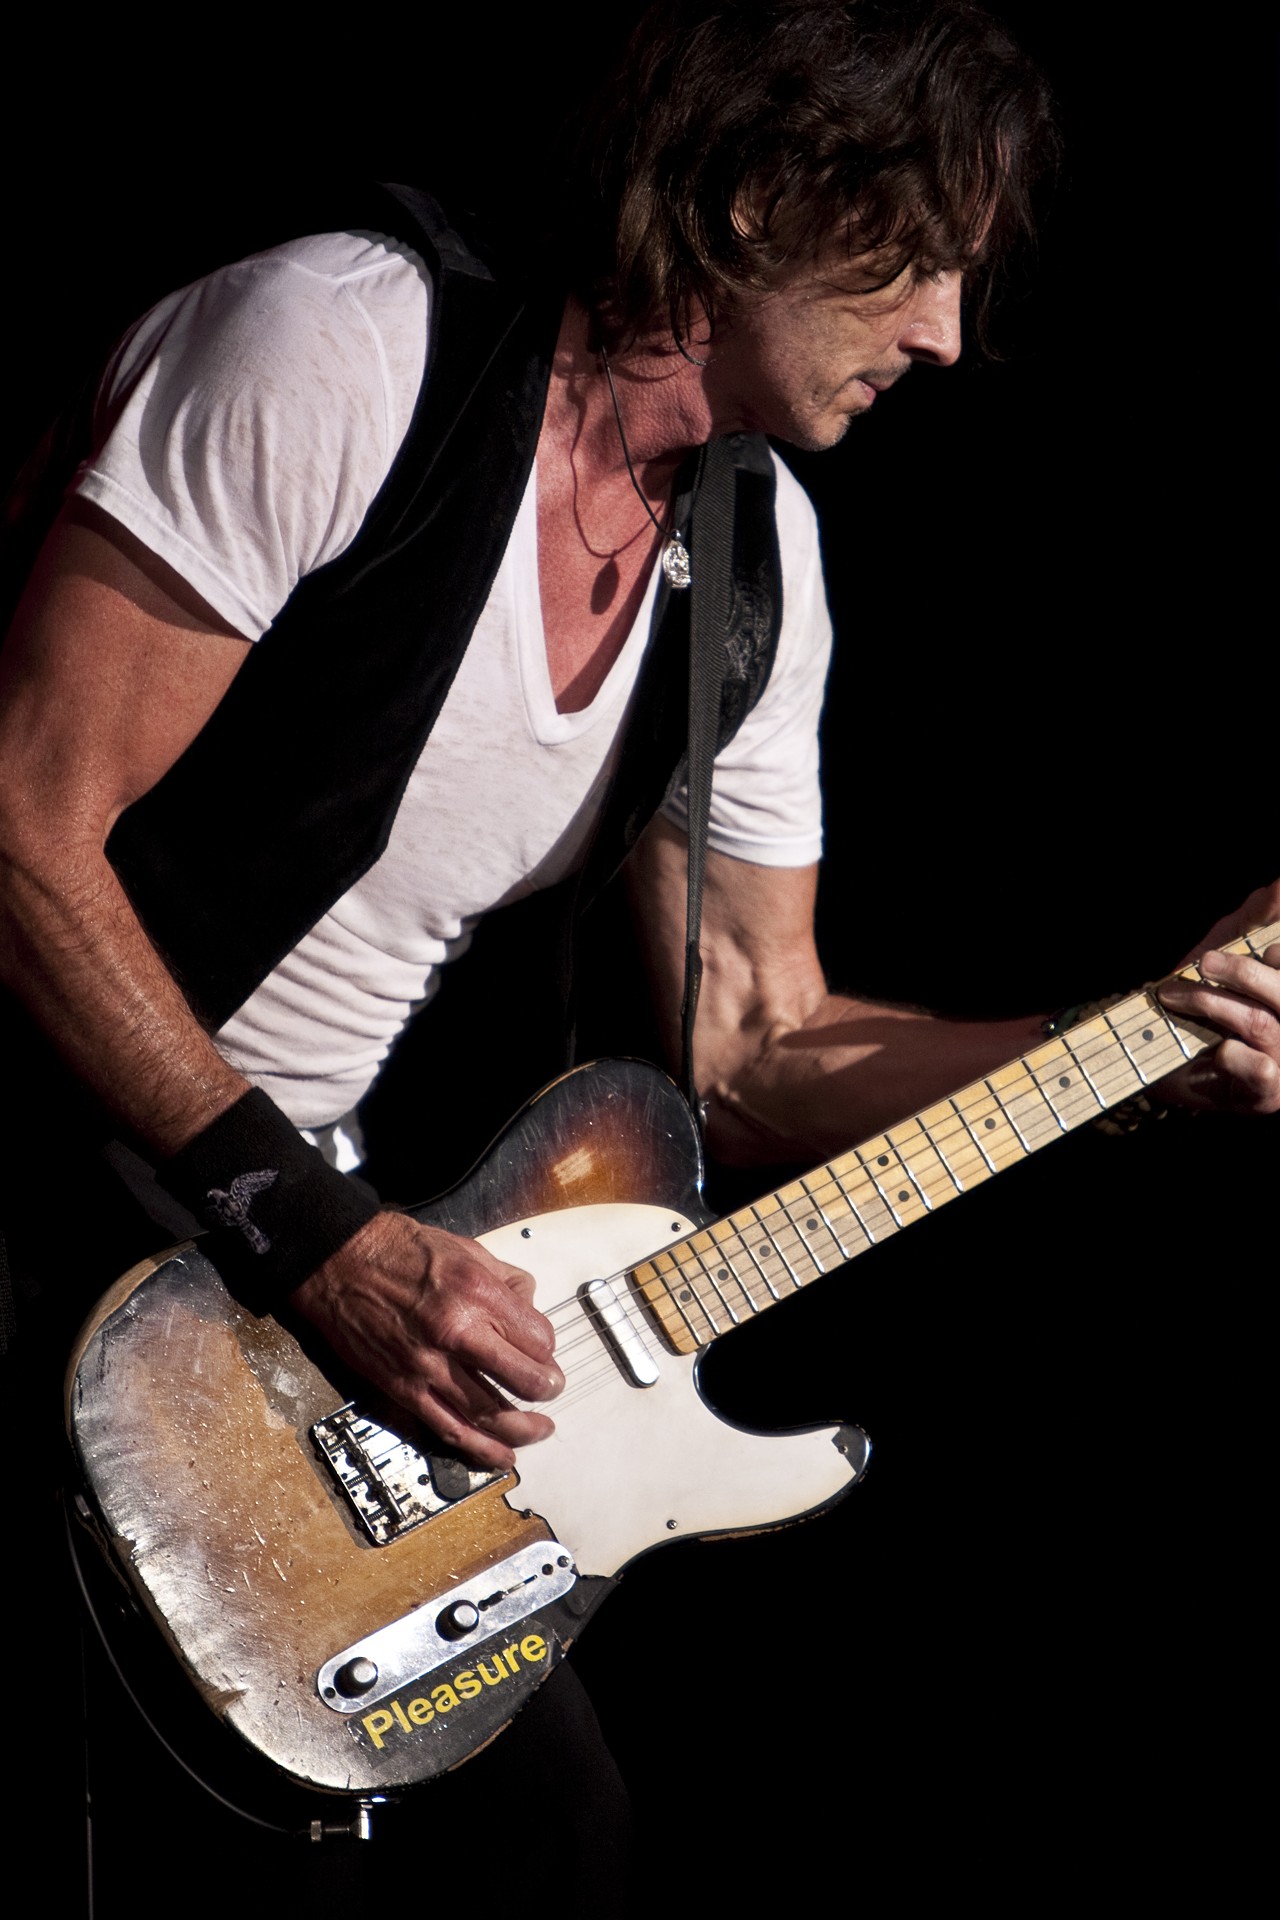 Rick Springfield5:30 p.m., 6:45 p.m. and 8 p.m. Oct. 12-13 at Epcot, price of admission